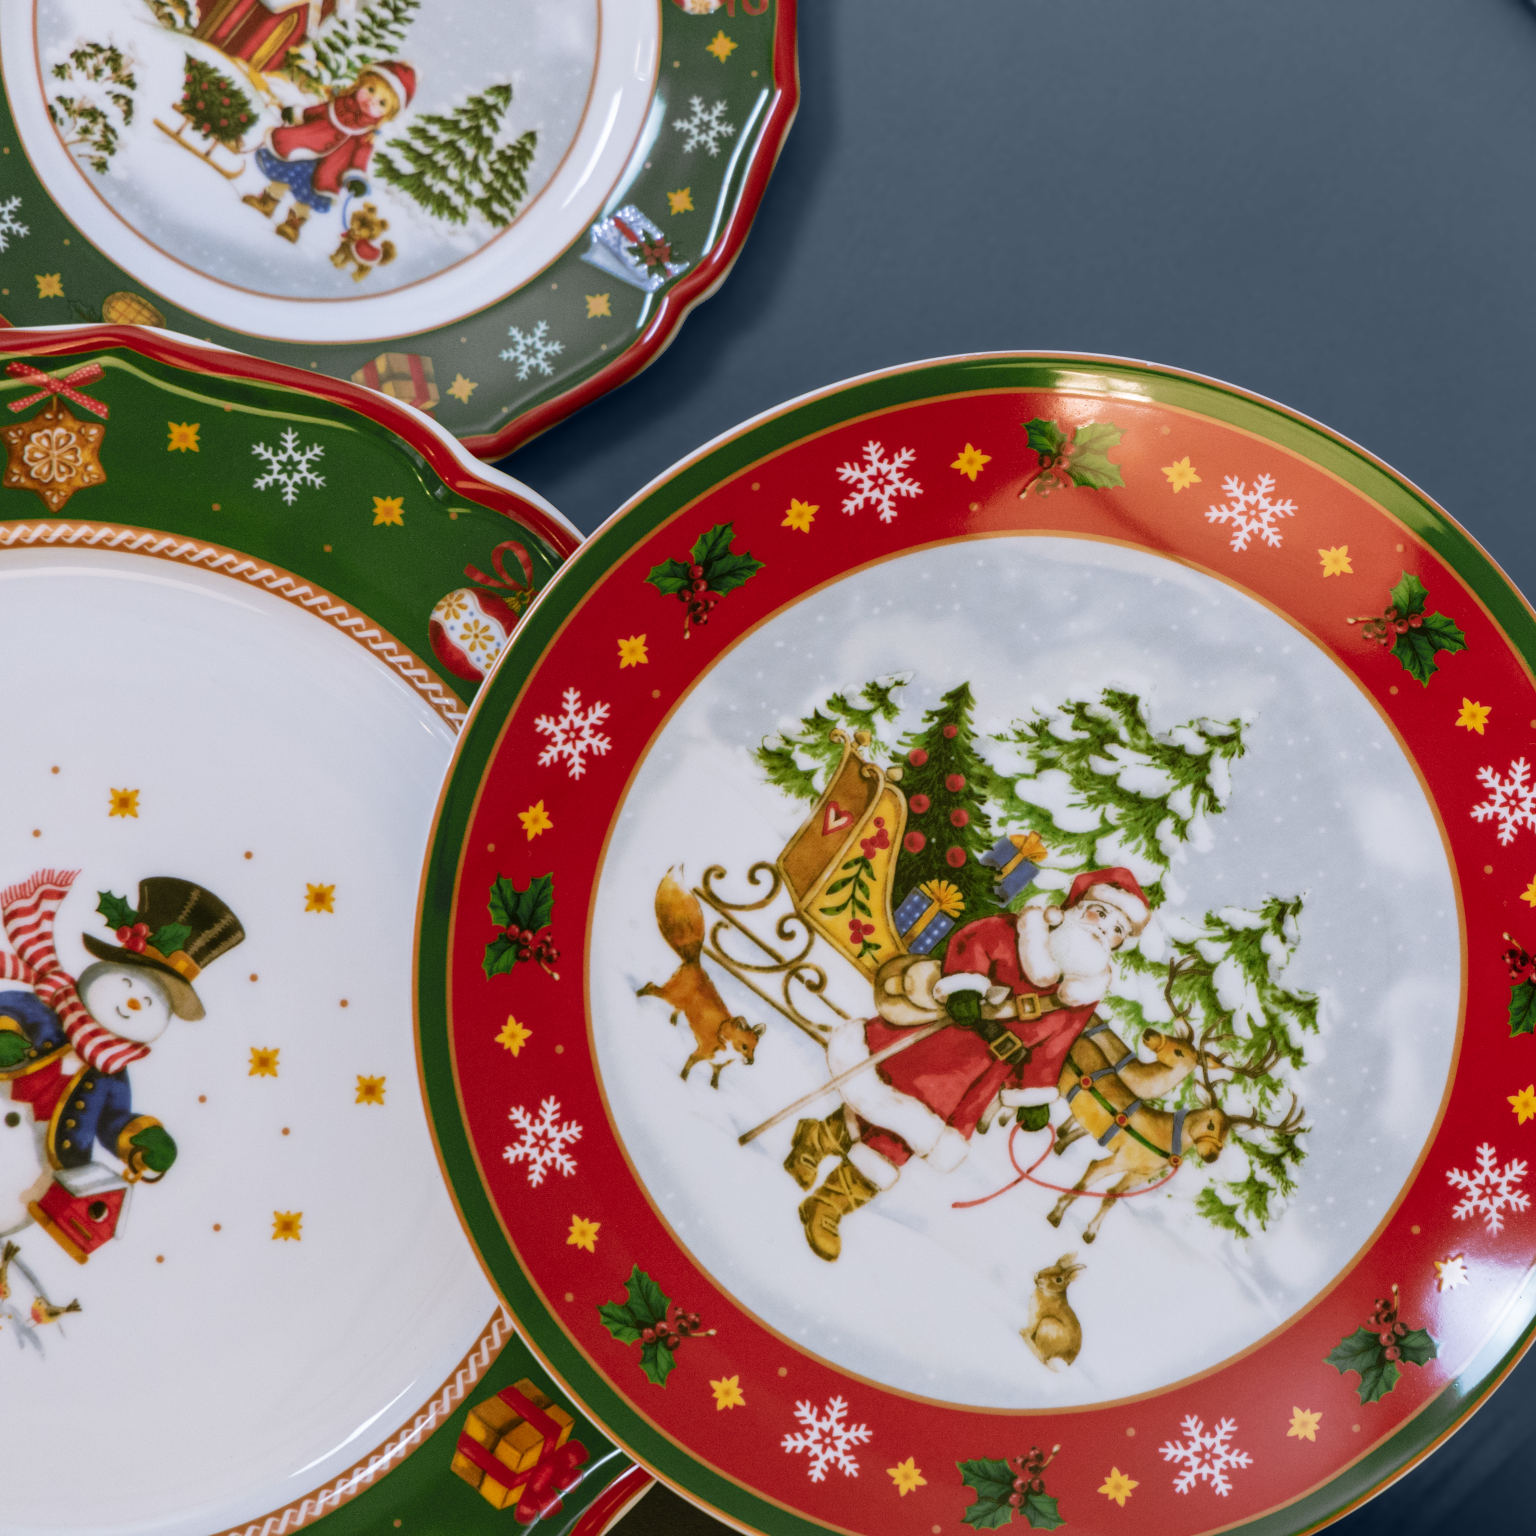 Christmas plates from Hutschenreuther Happy Wintertime 